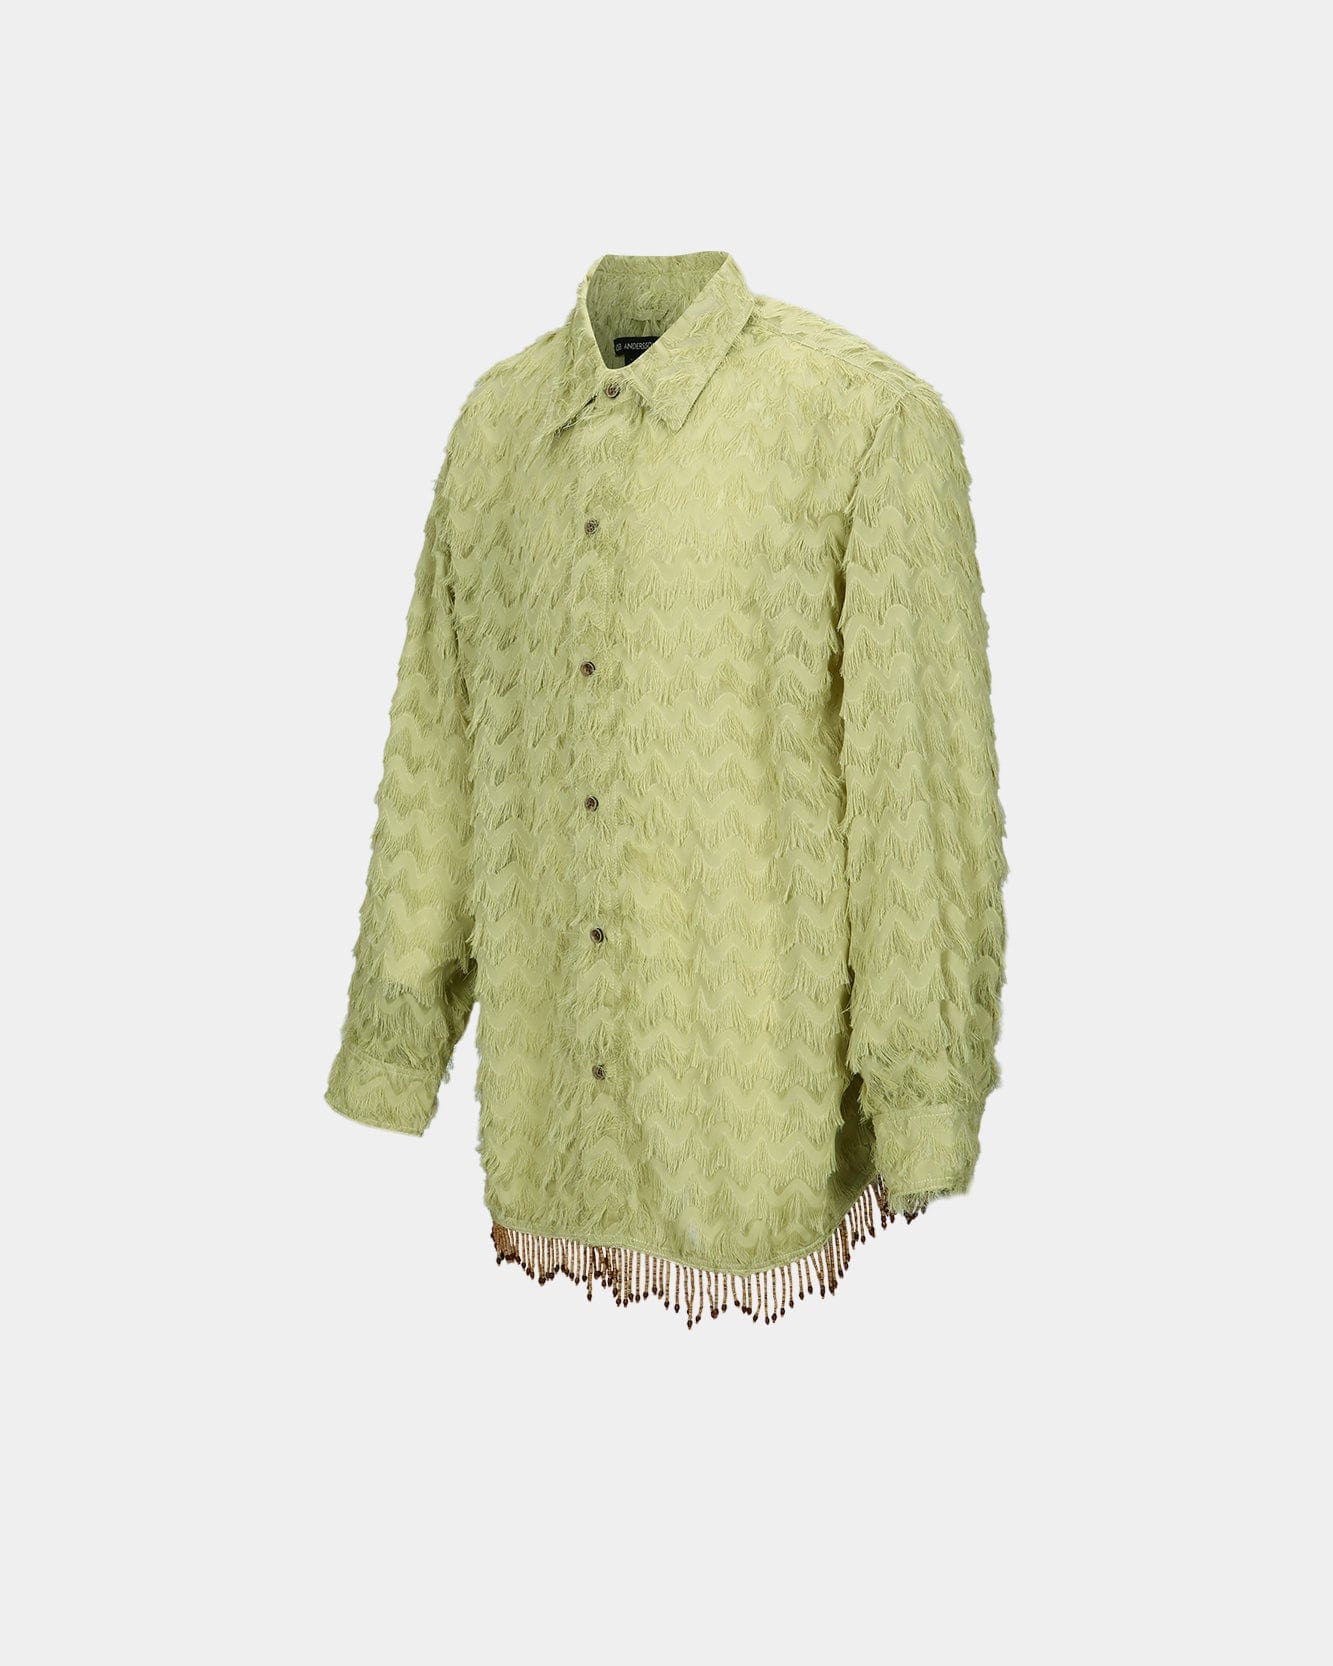 Andersson Bell BIRD SHAGGY LONG SHIRTS atb1053m(OLIVE)